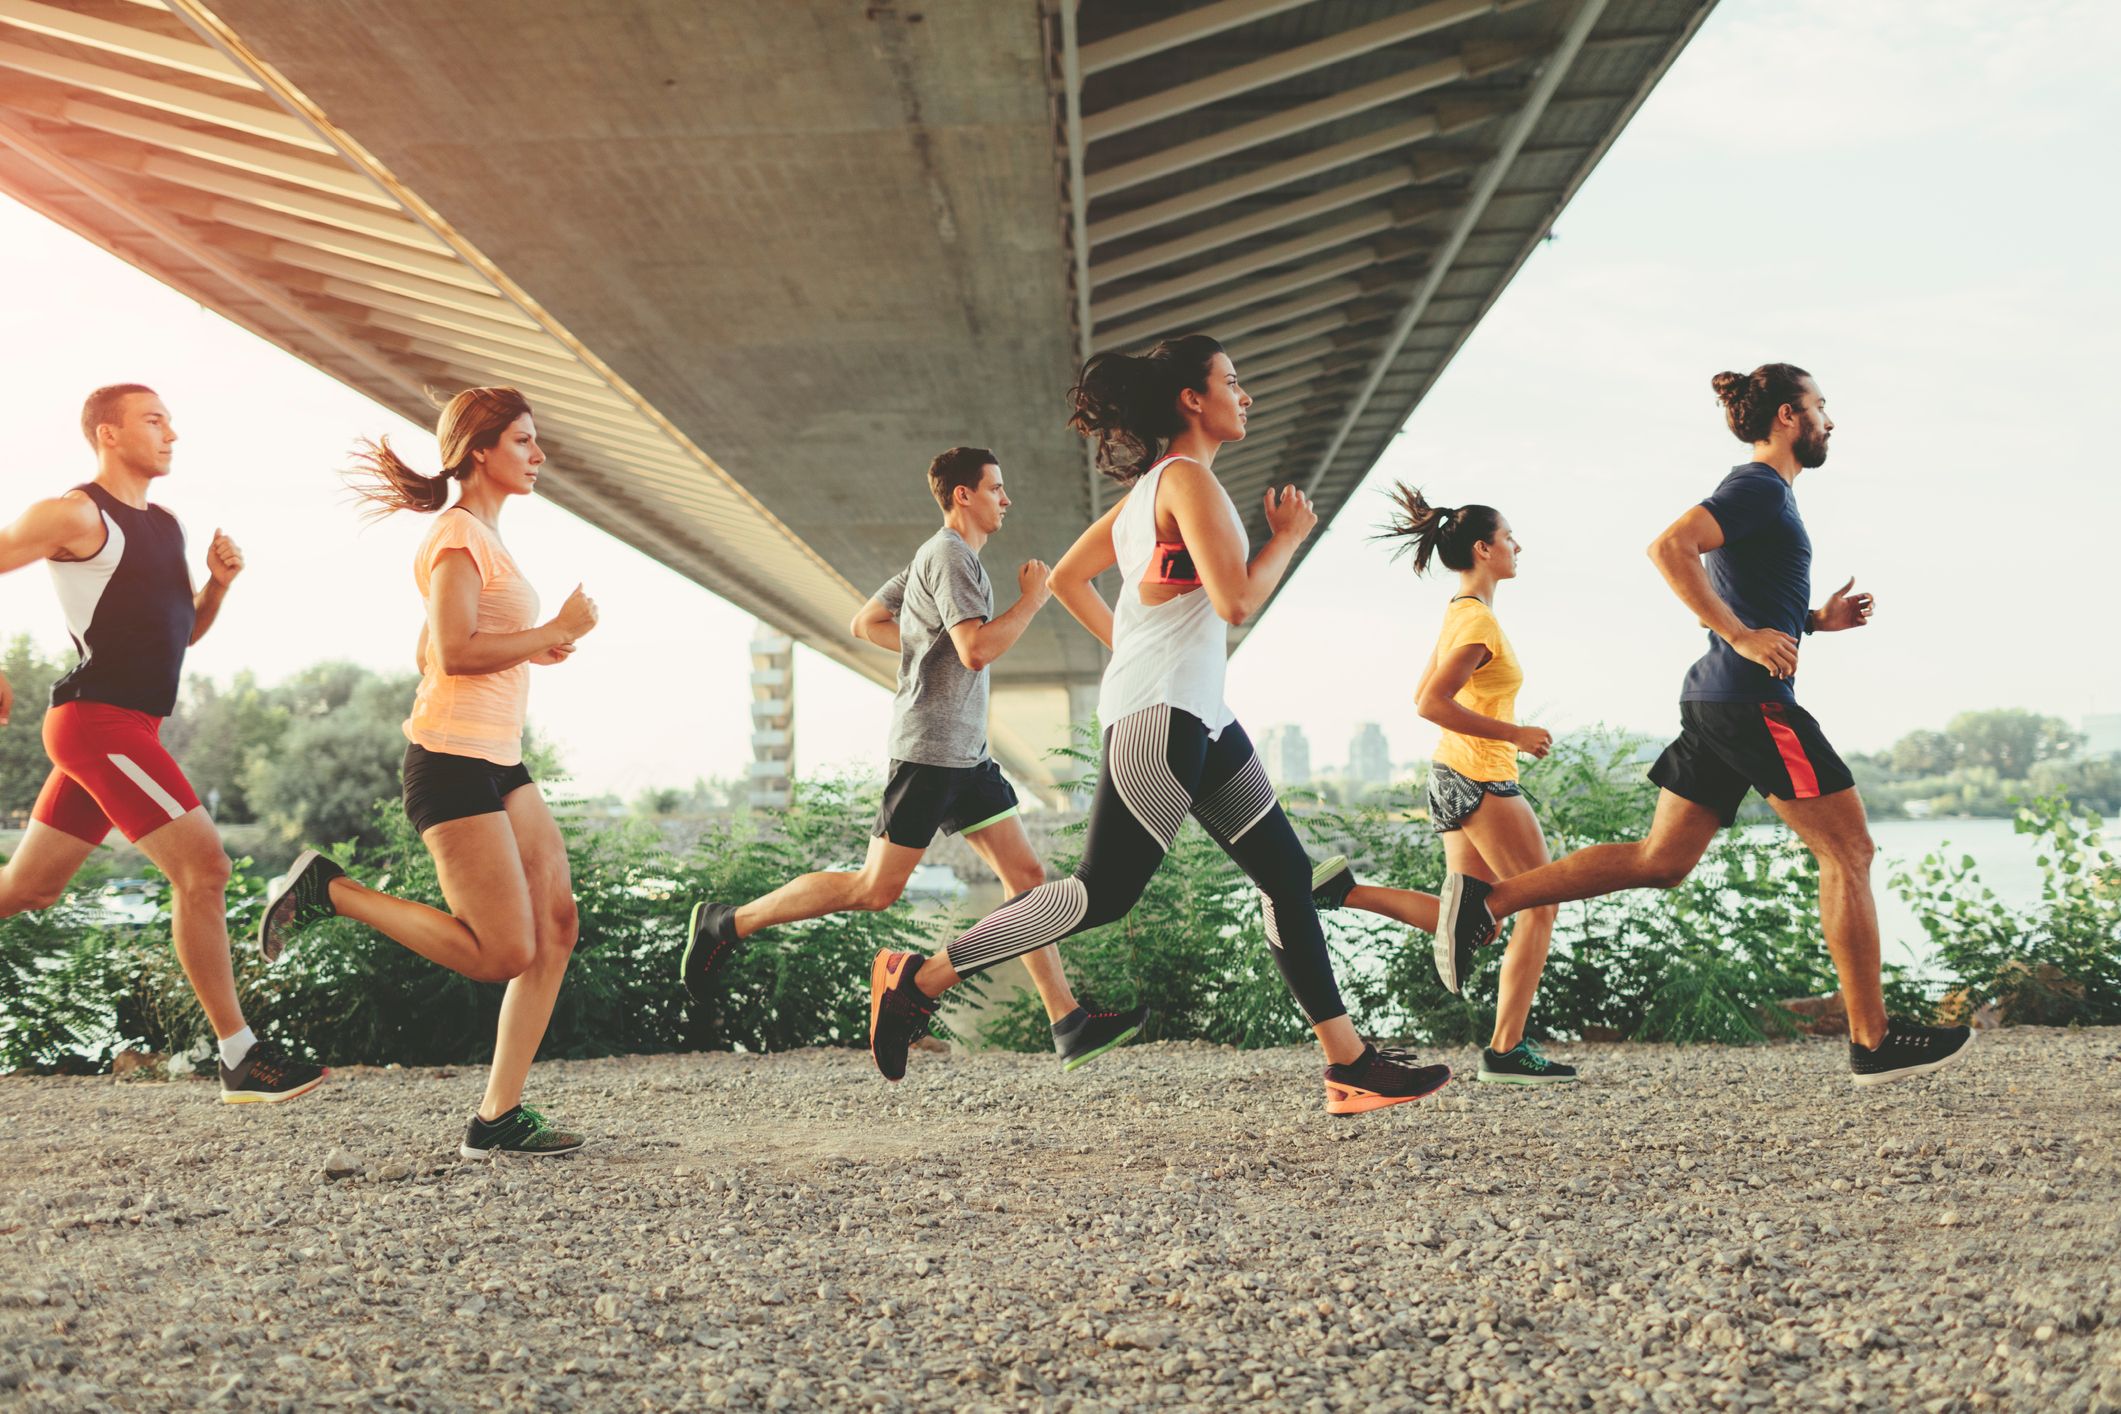 Running has little effect on weight loss but has other health benefits